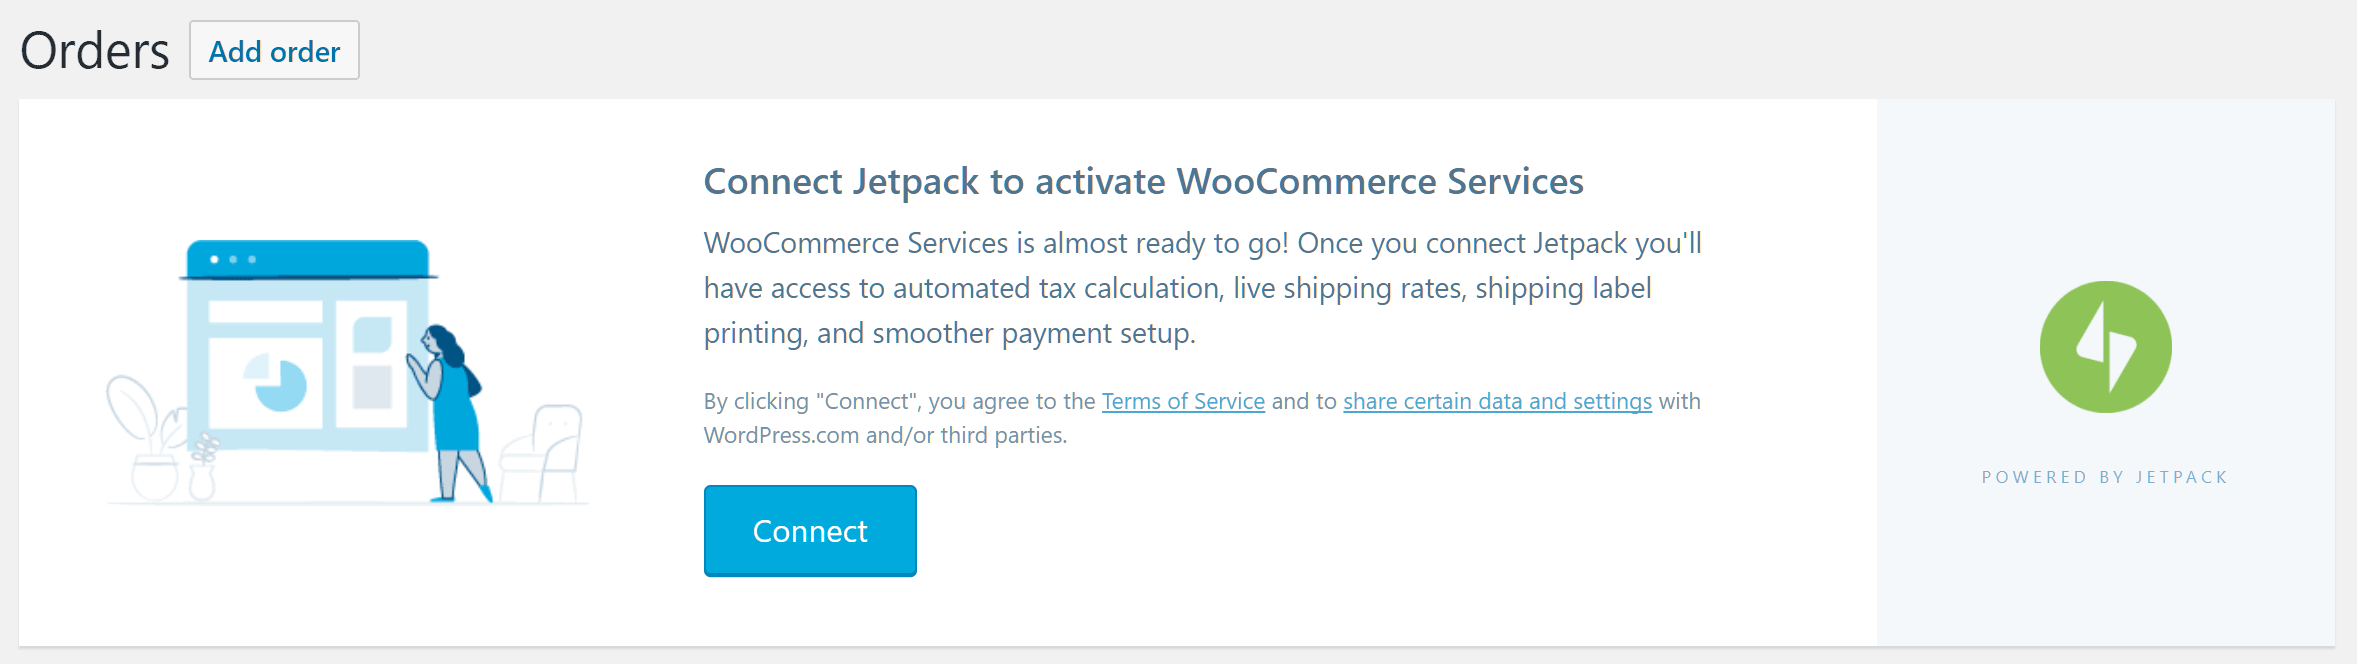 Jetpack Connect for WooCommerce 